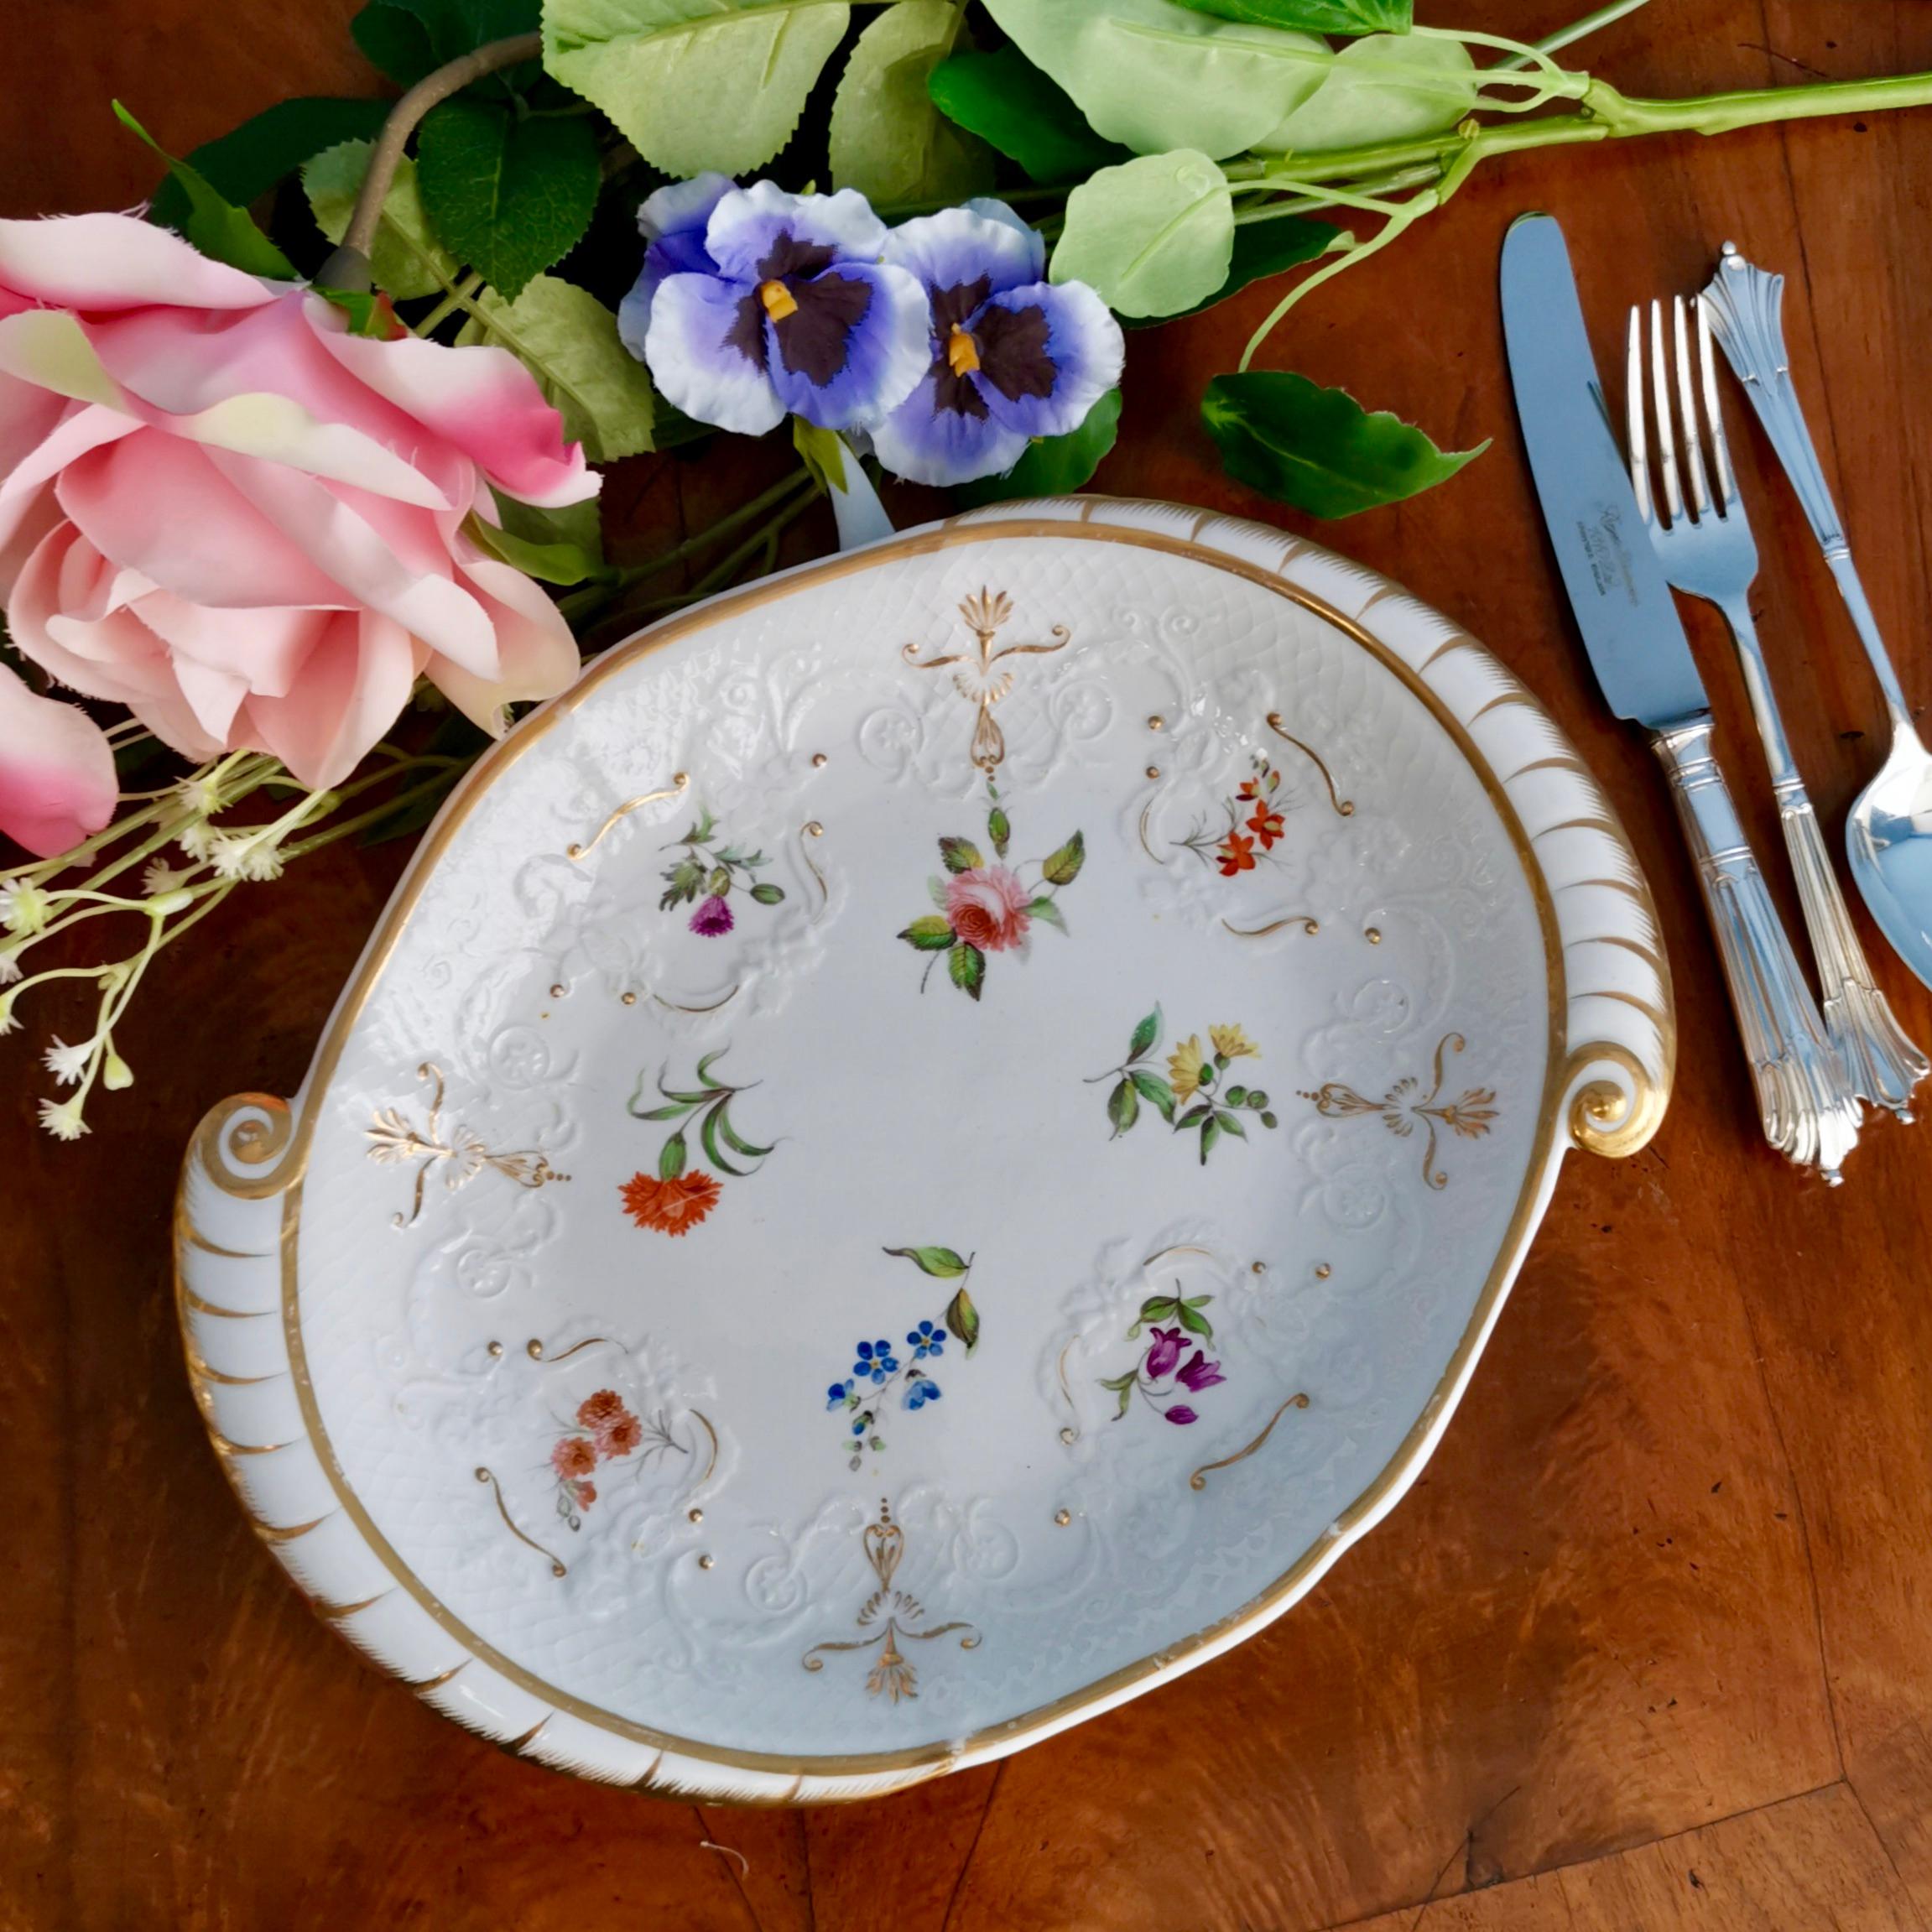 This is a very fine and beautiful serving dish made in Staffordshire in the very early 19th century. The dish has a striking oval shape with gilded handles, superbly fine surface moulding and very skilfully painted wild flowers dotted over the